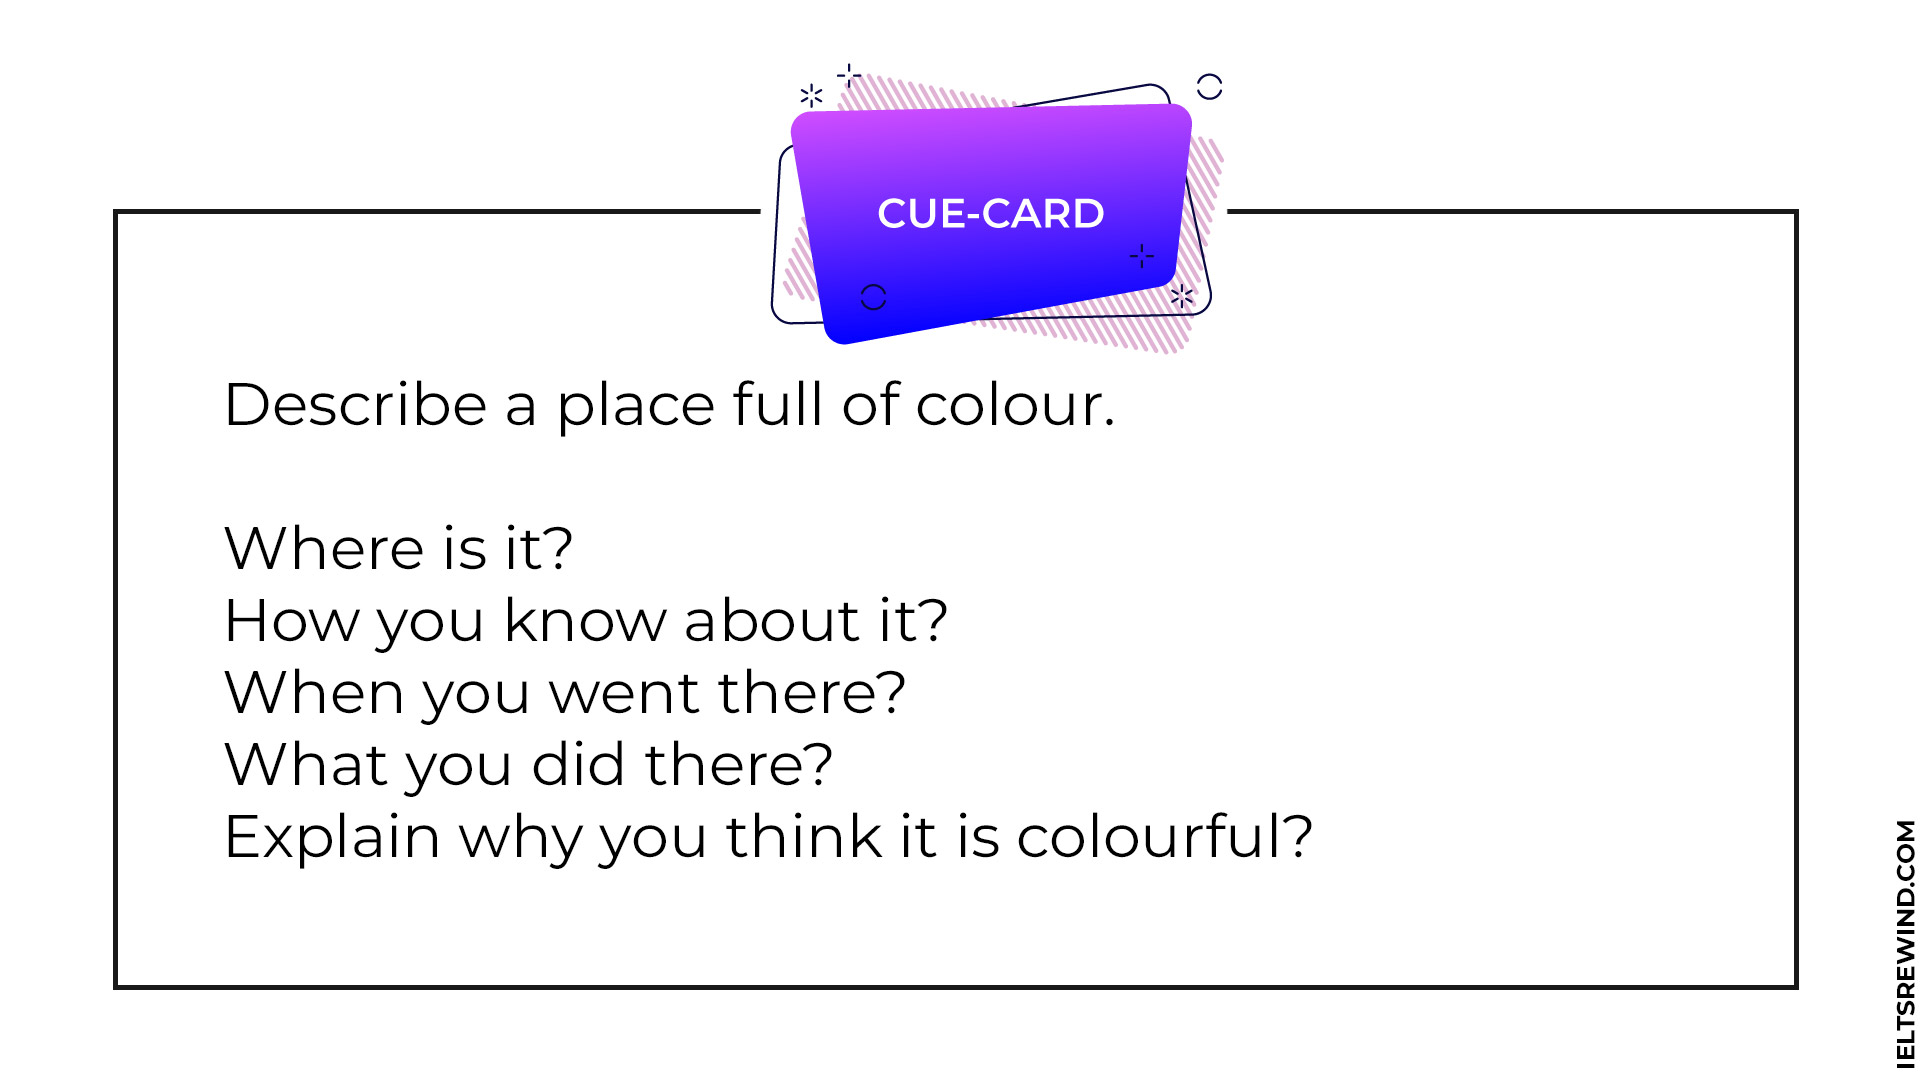 Describe a place full of colour IELTS cue card